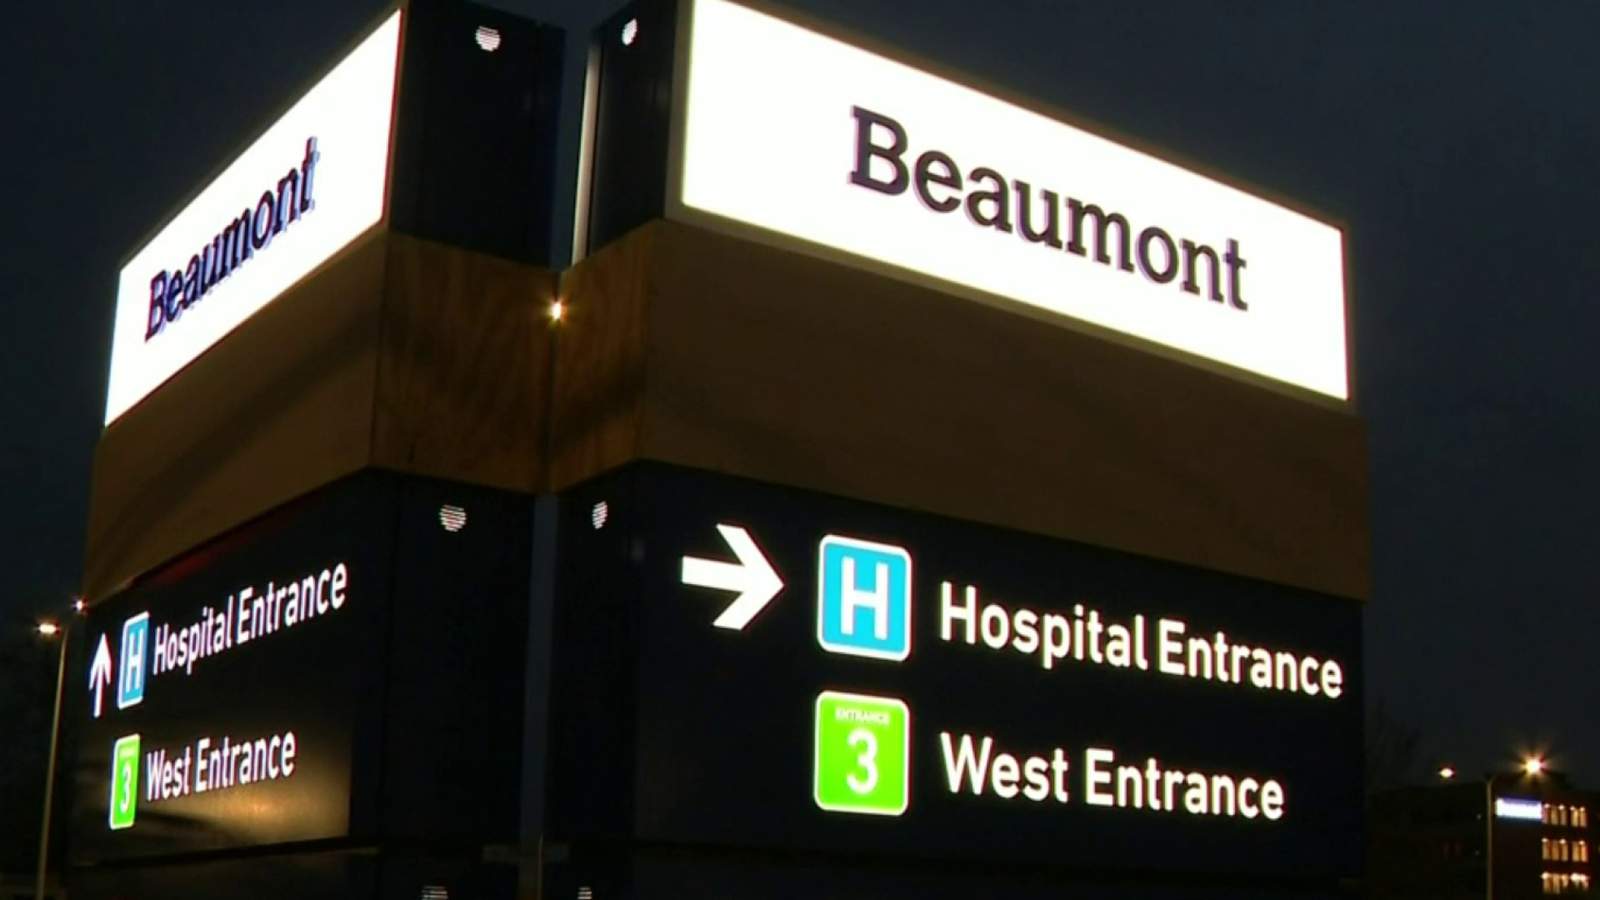 Beaumont Wayne Hospital to begin reopening today after closing in midst COVID-19 pandemic